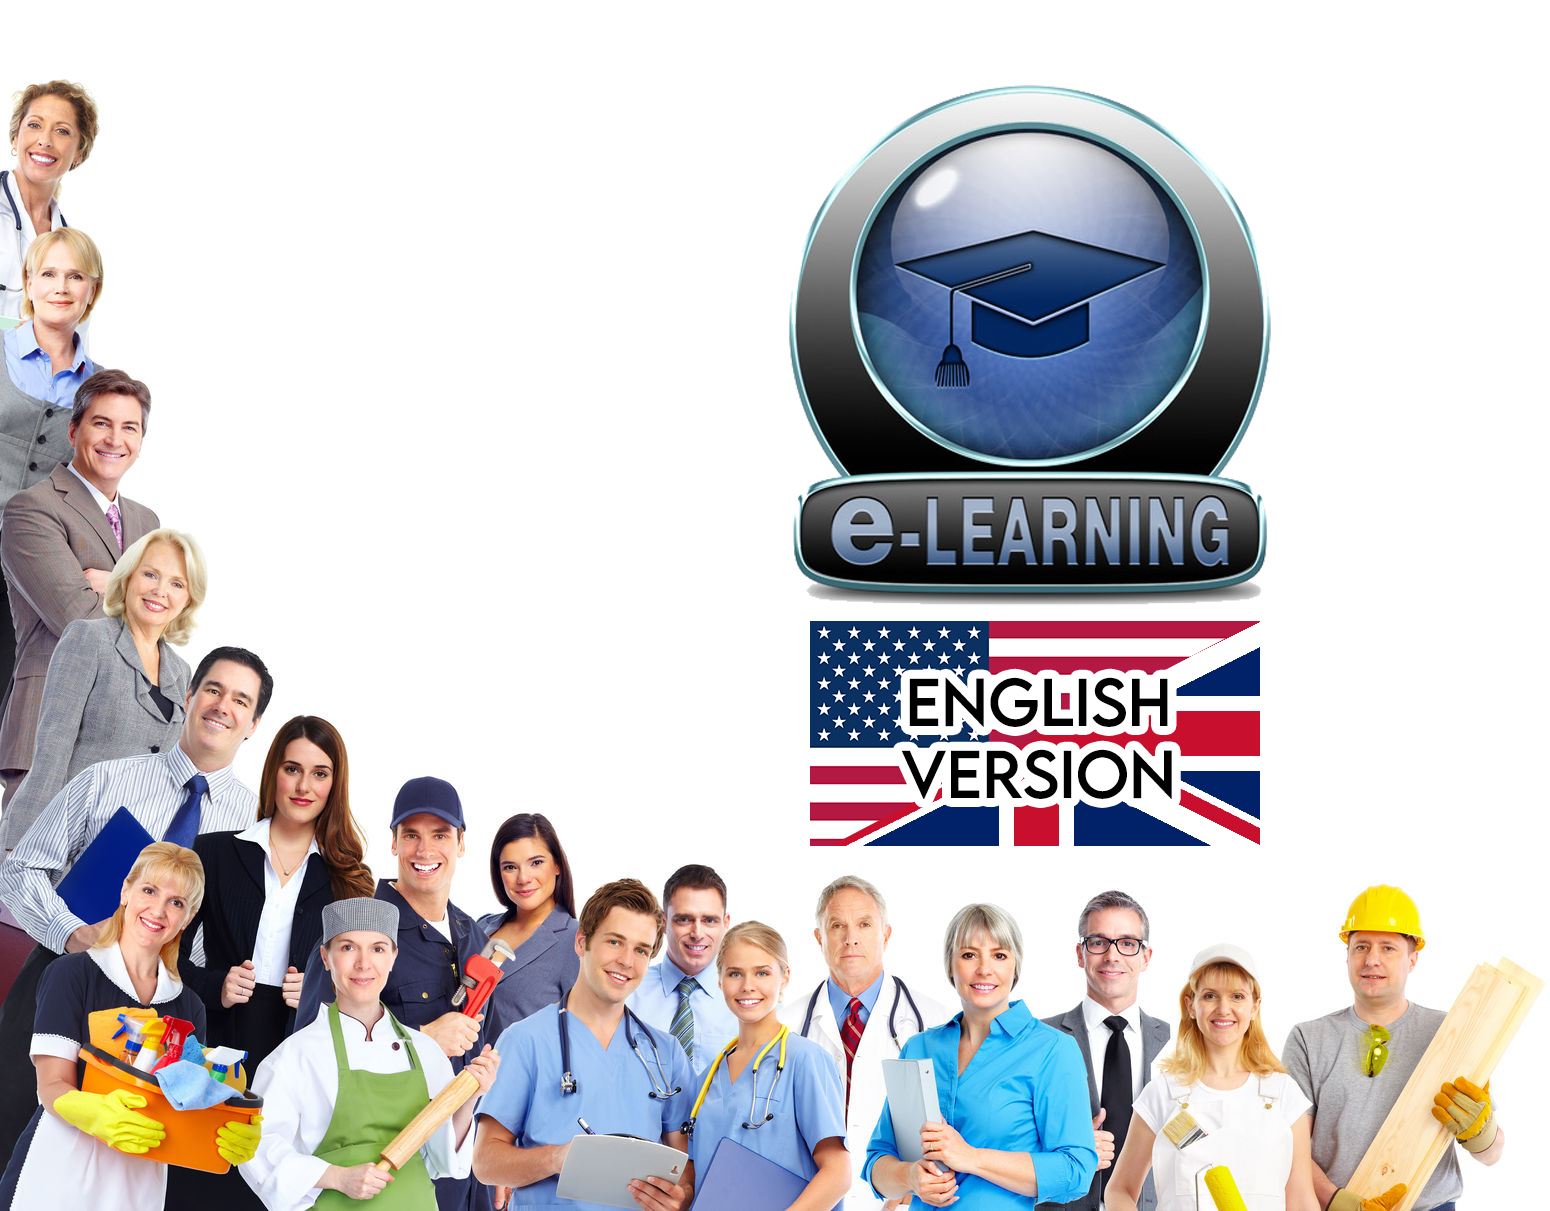 e-learning---refresher-course-posture-and-spinal-hygiene-for-worker-and-manager---eng